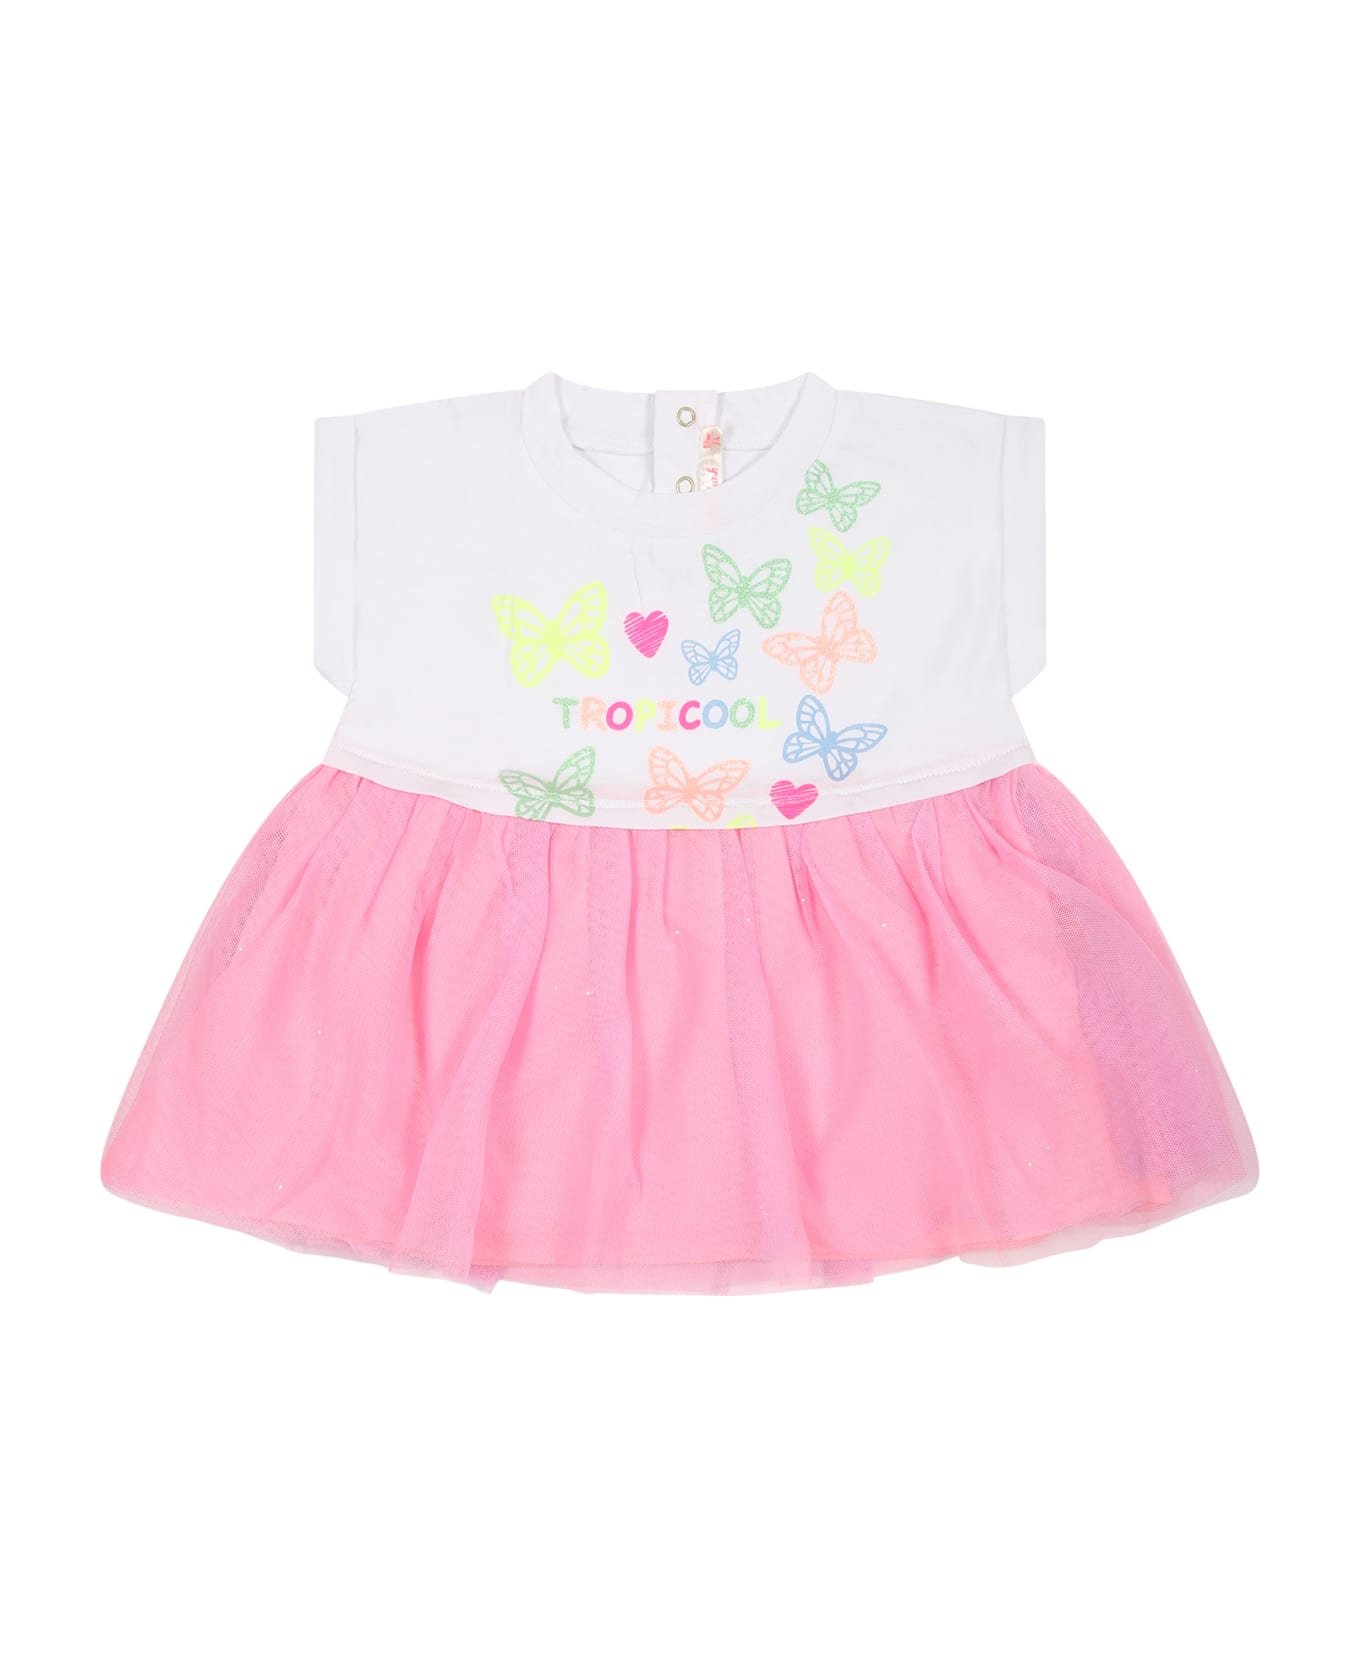 Billieblush White Suit For Baby Girl With Butterflies And Hearts - White ボトムス